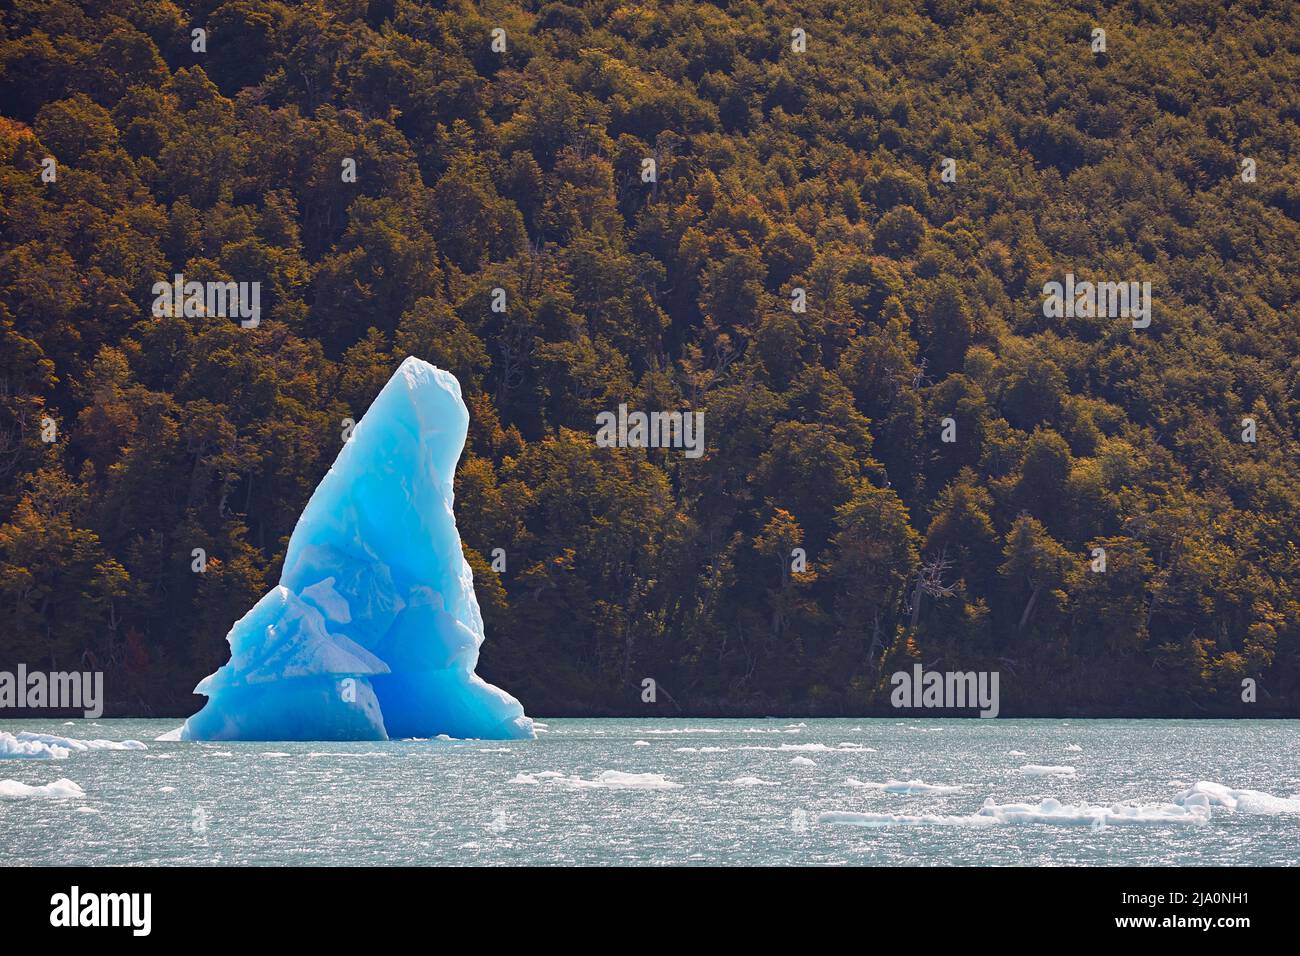 A big blue iceberg in the "Canal de los Tempanos" bay with autumn trees in the background, Los Glaciares National Park, El Calafate, Argentina. Stock Photo